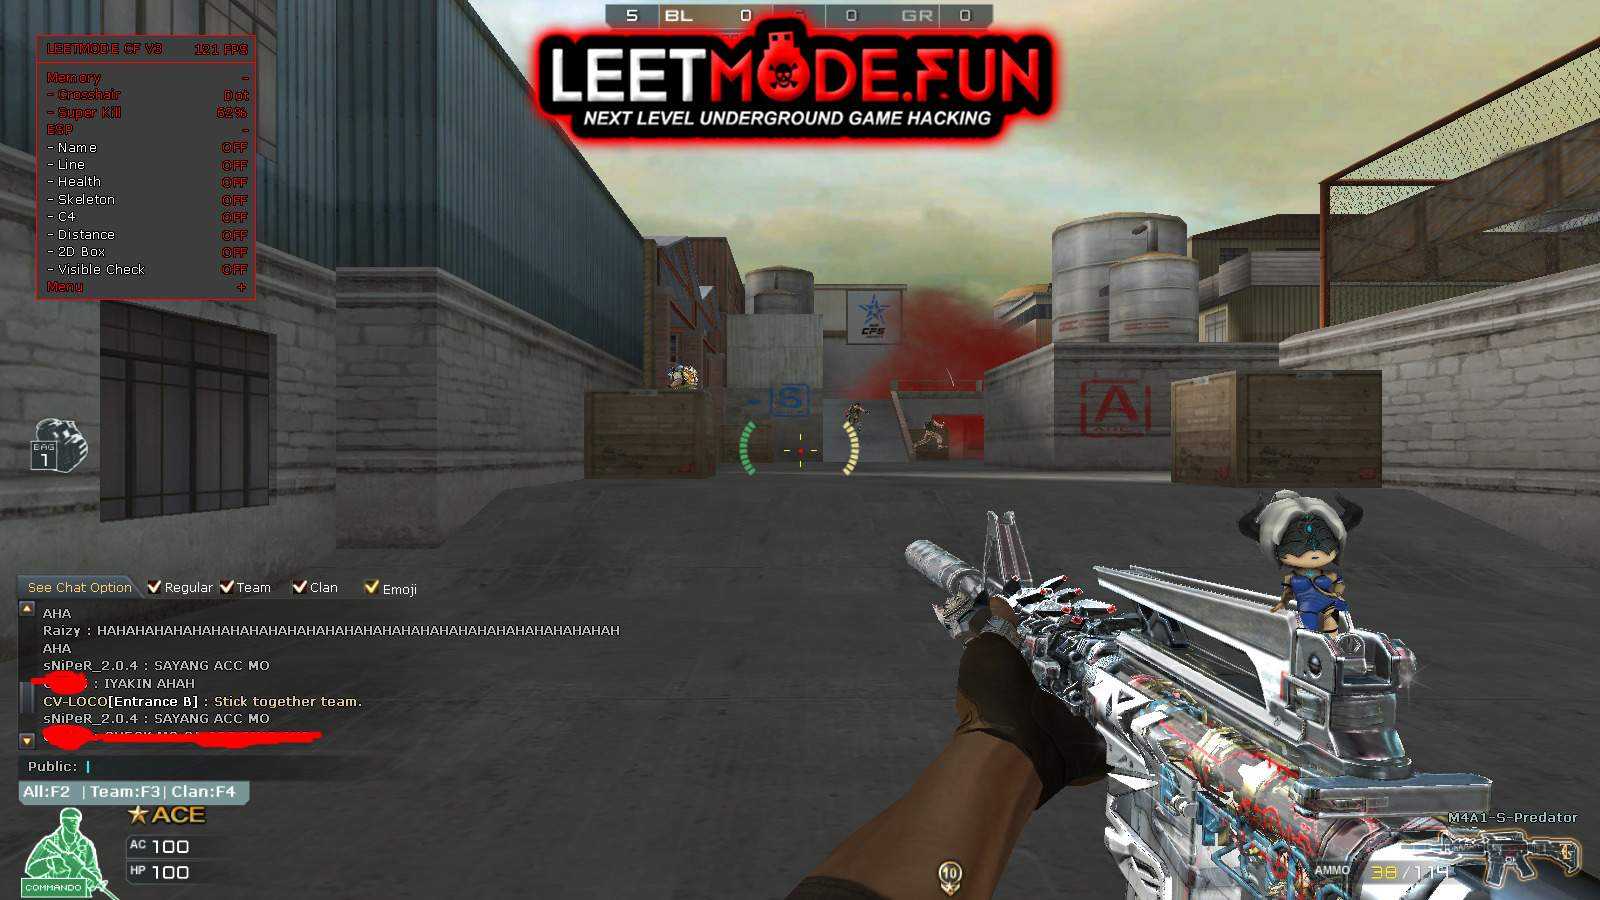 Download CrossFire